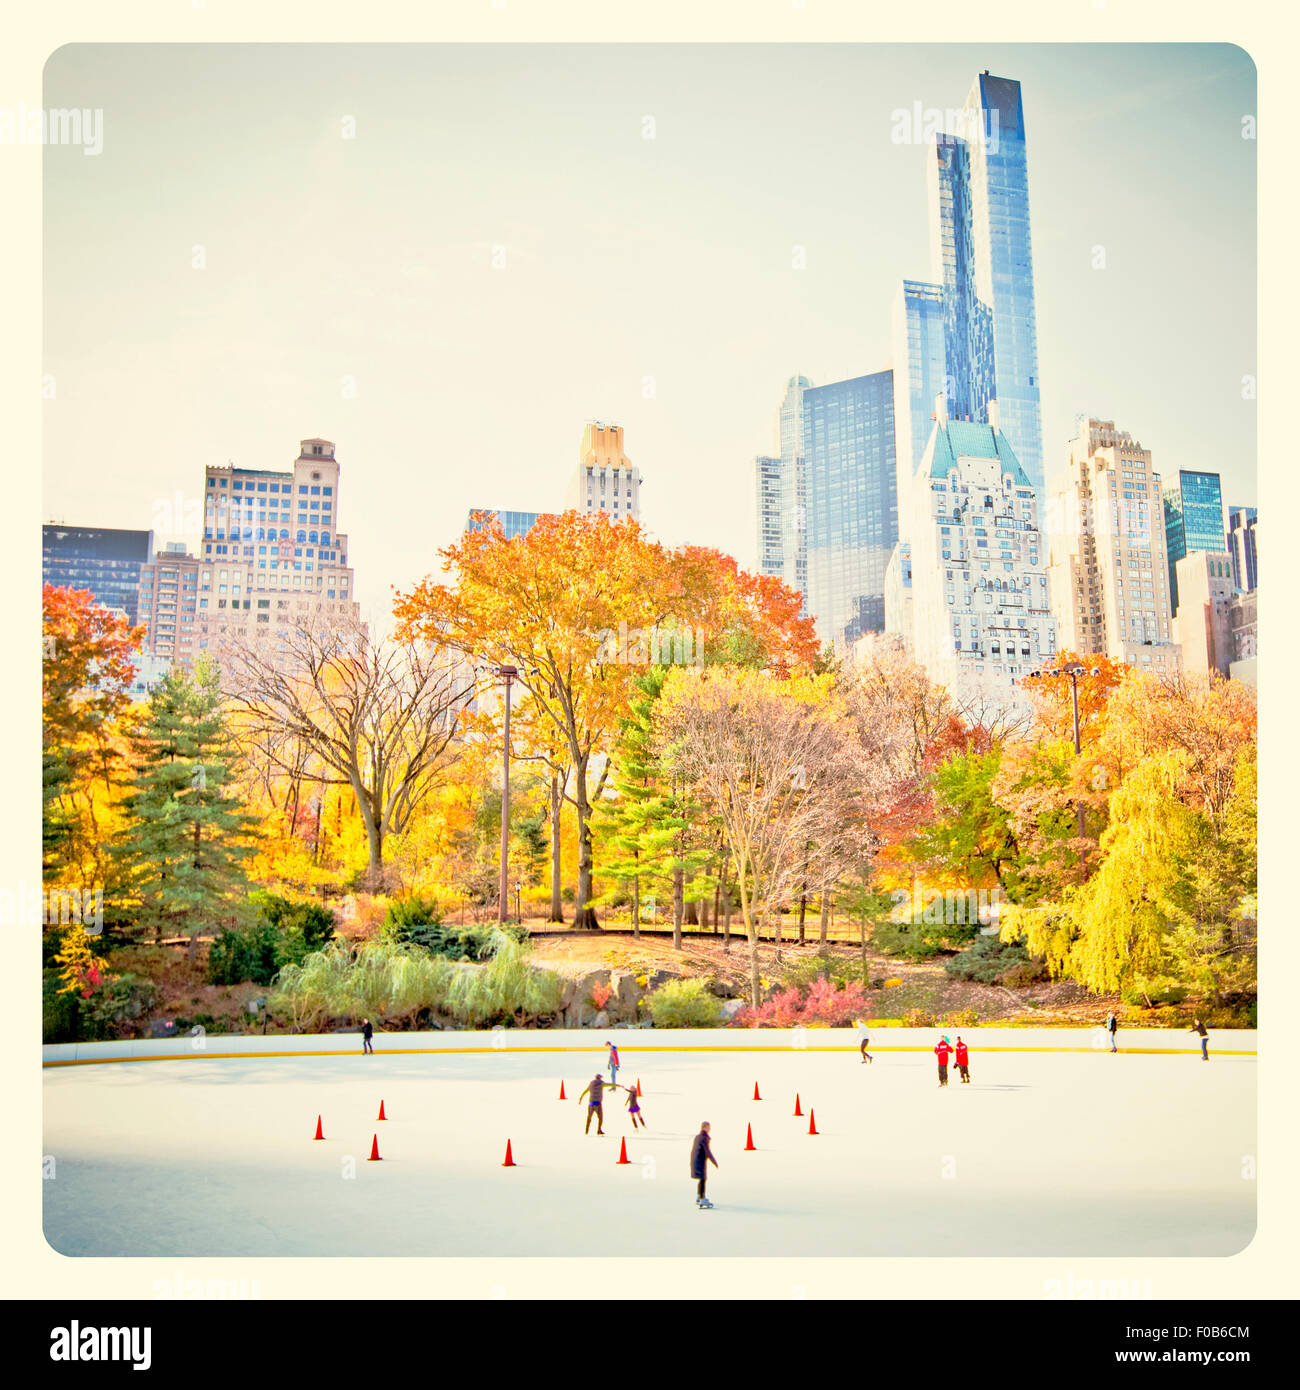 Ice skaters having fun in New York Central Park in fall with Instagram style filter Stock Photo